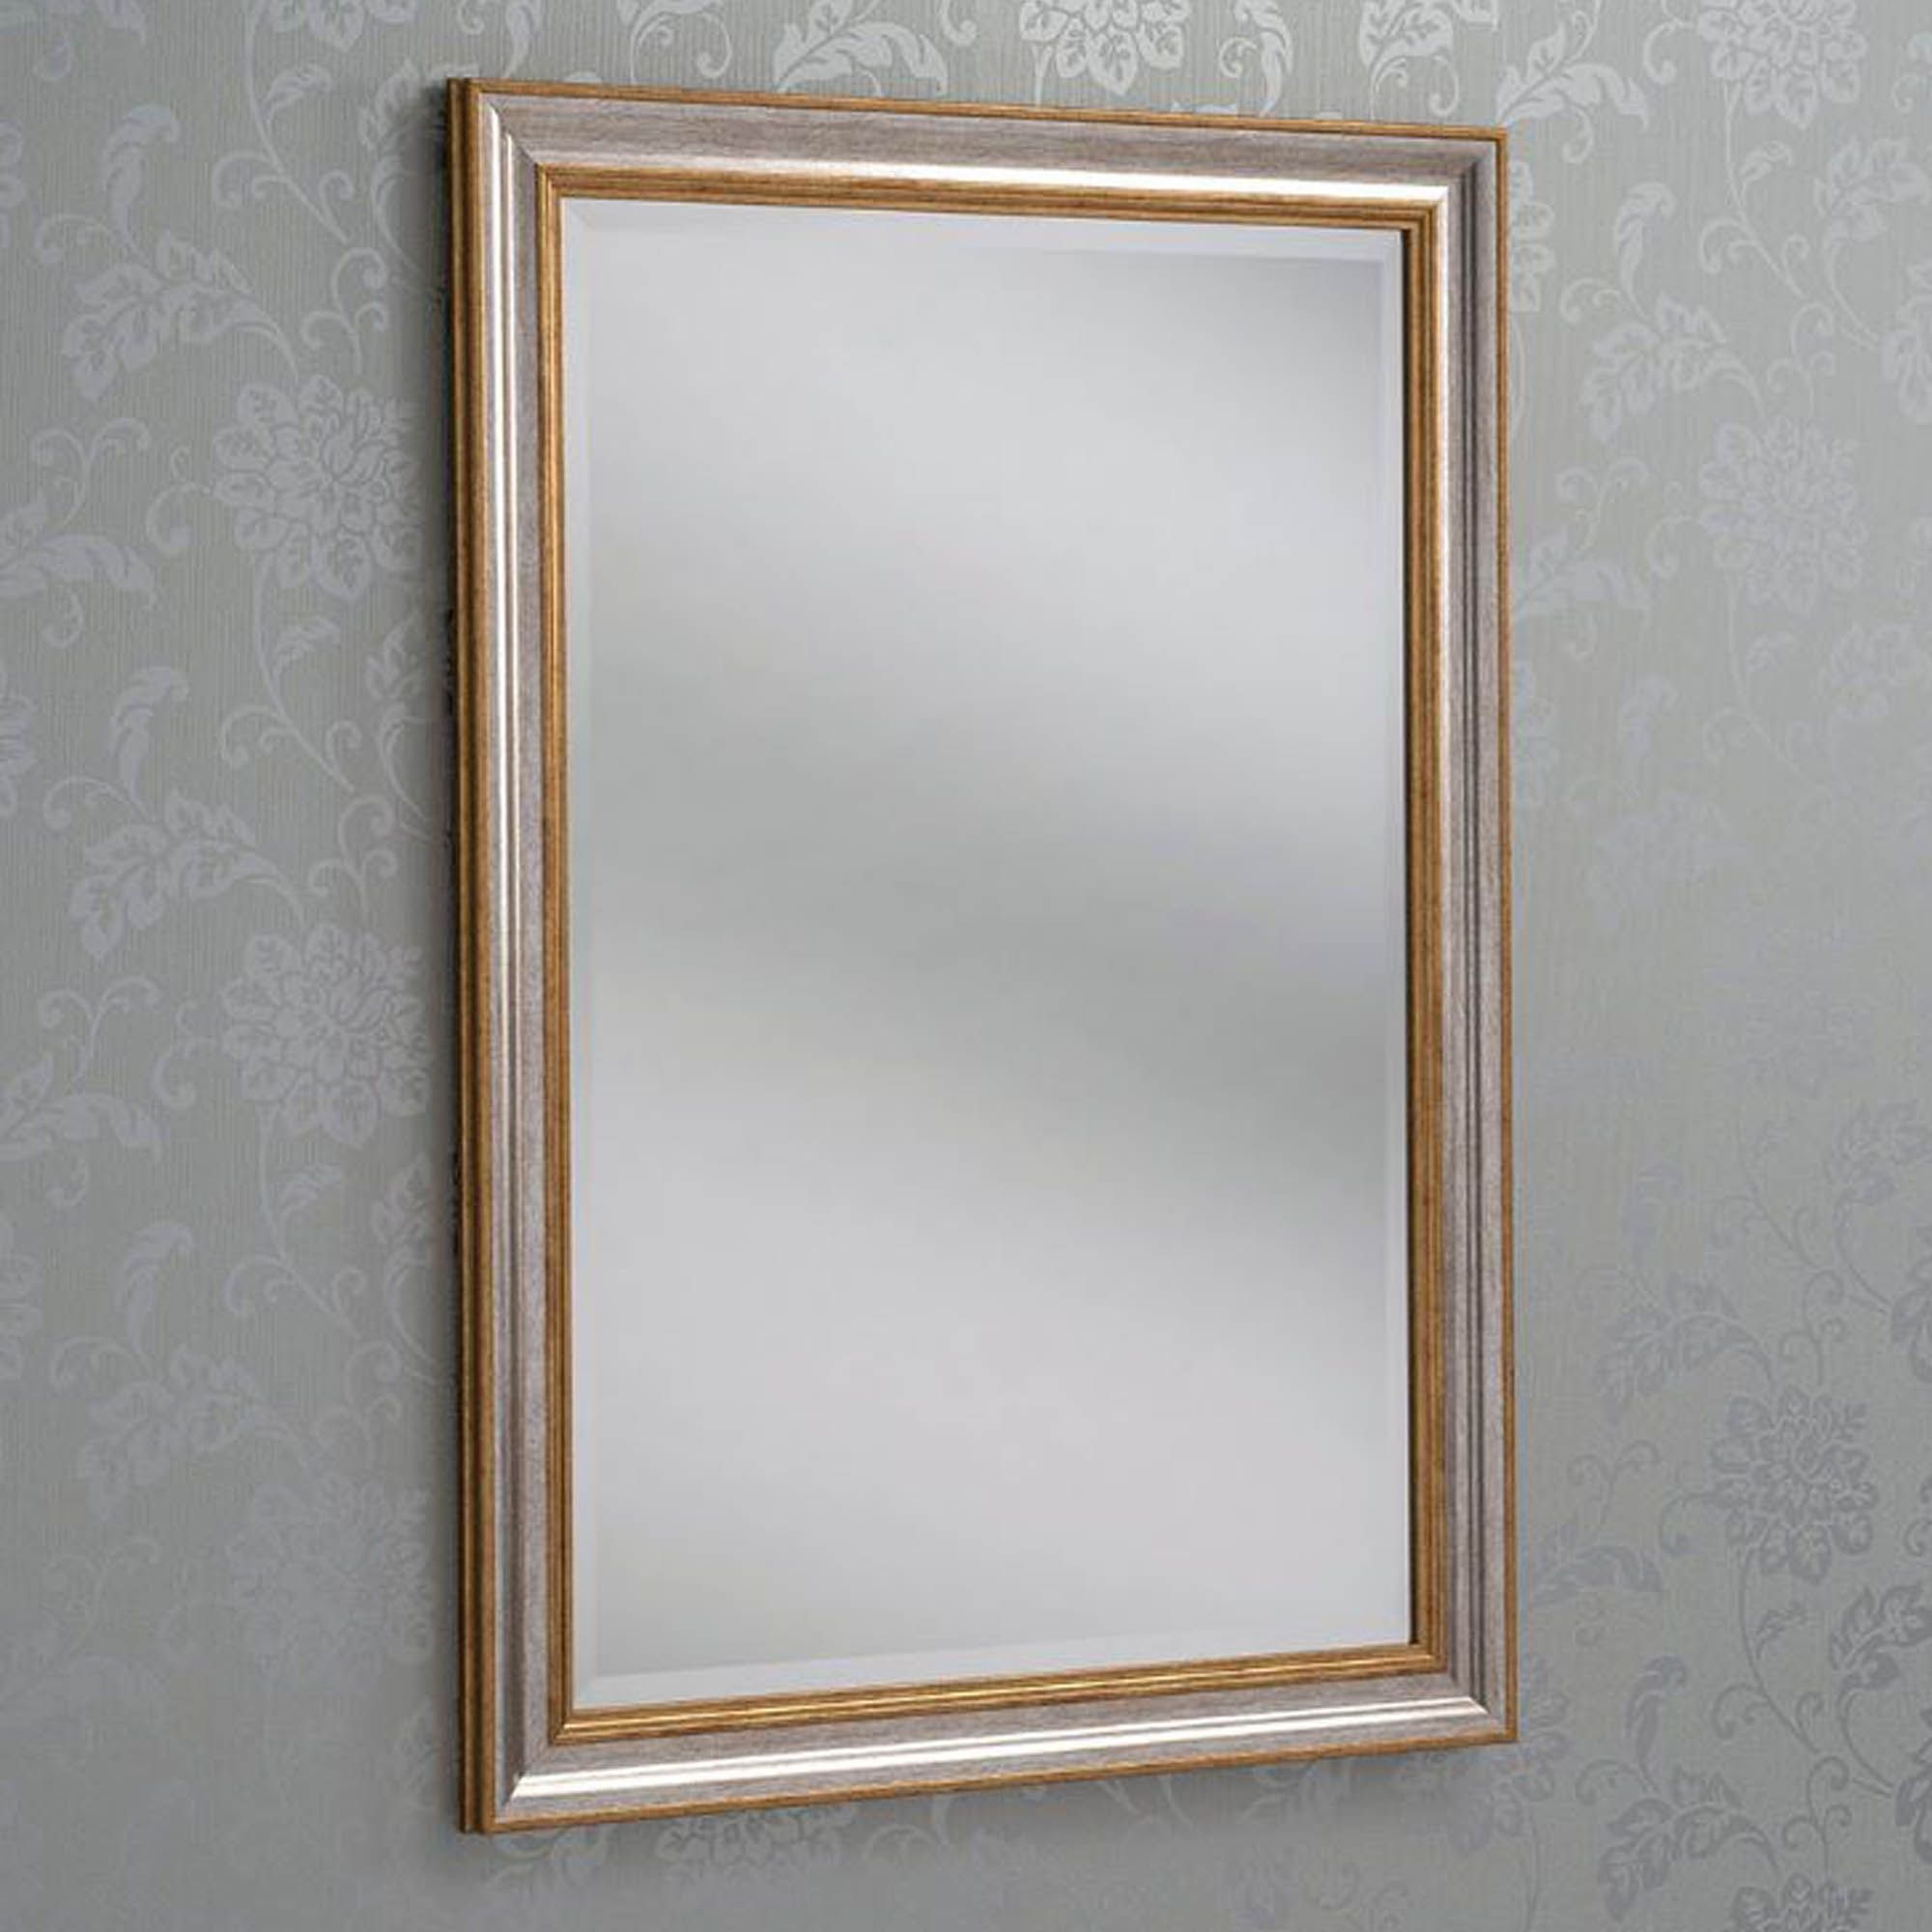 Gold & Silver Rectangular Wall Mirror | Wall Mirror Hd365 Inside Brushed Gold Rectangular Framed Wall Mirrors (View 2 of 15)